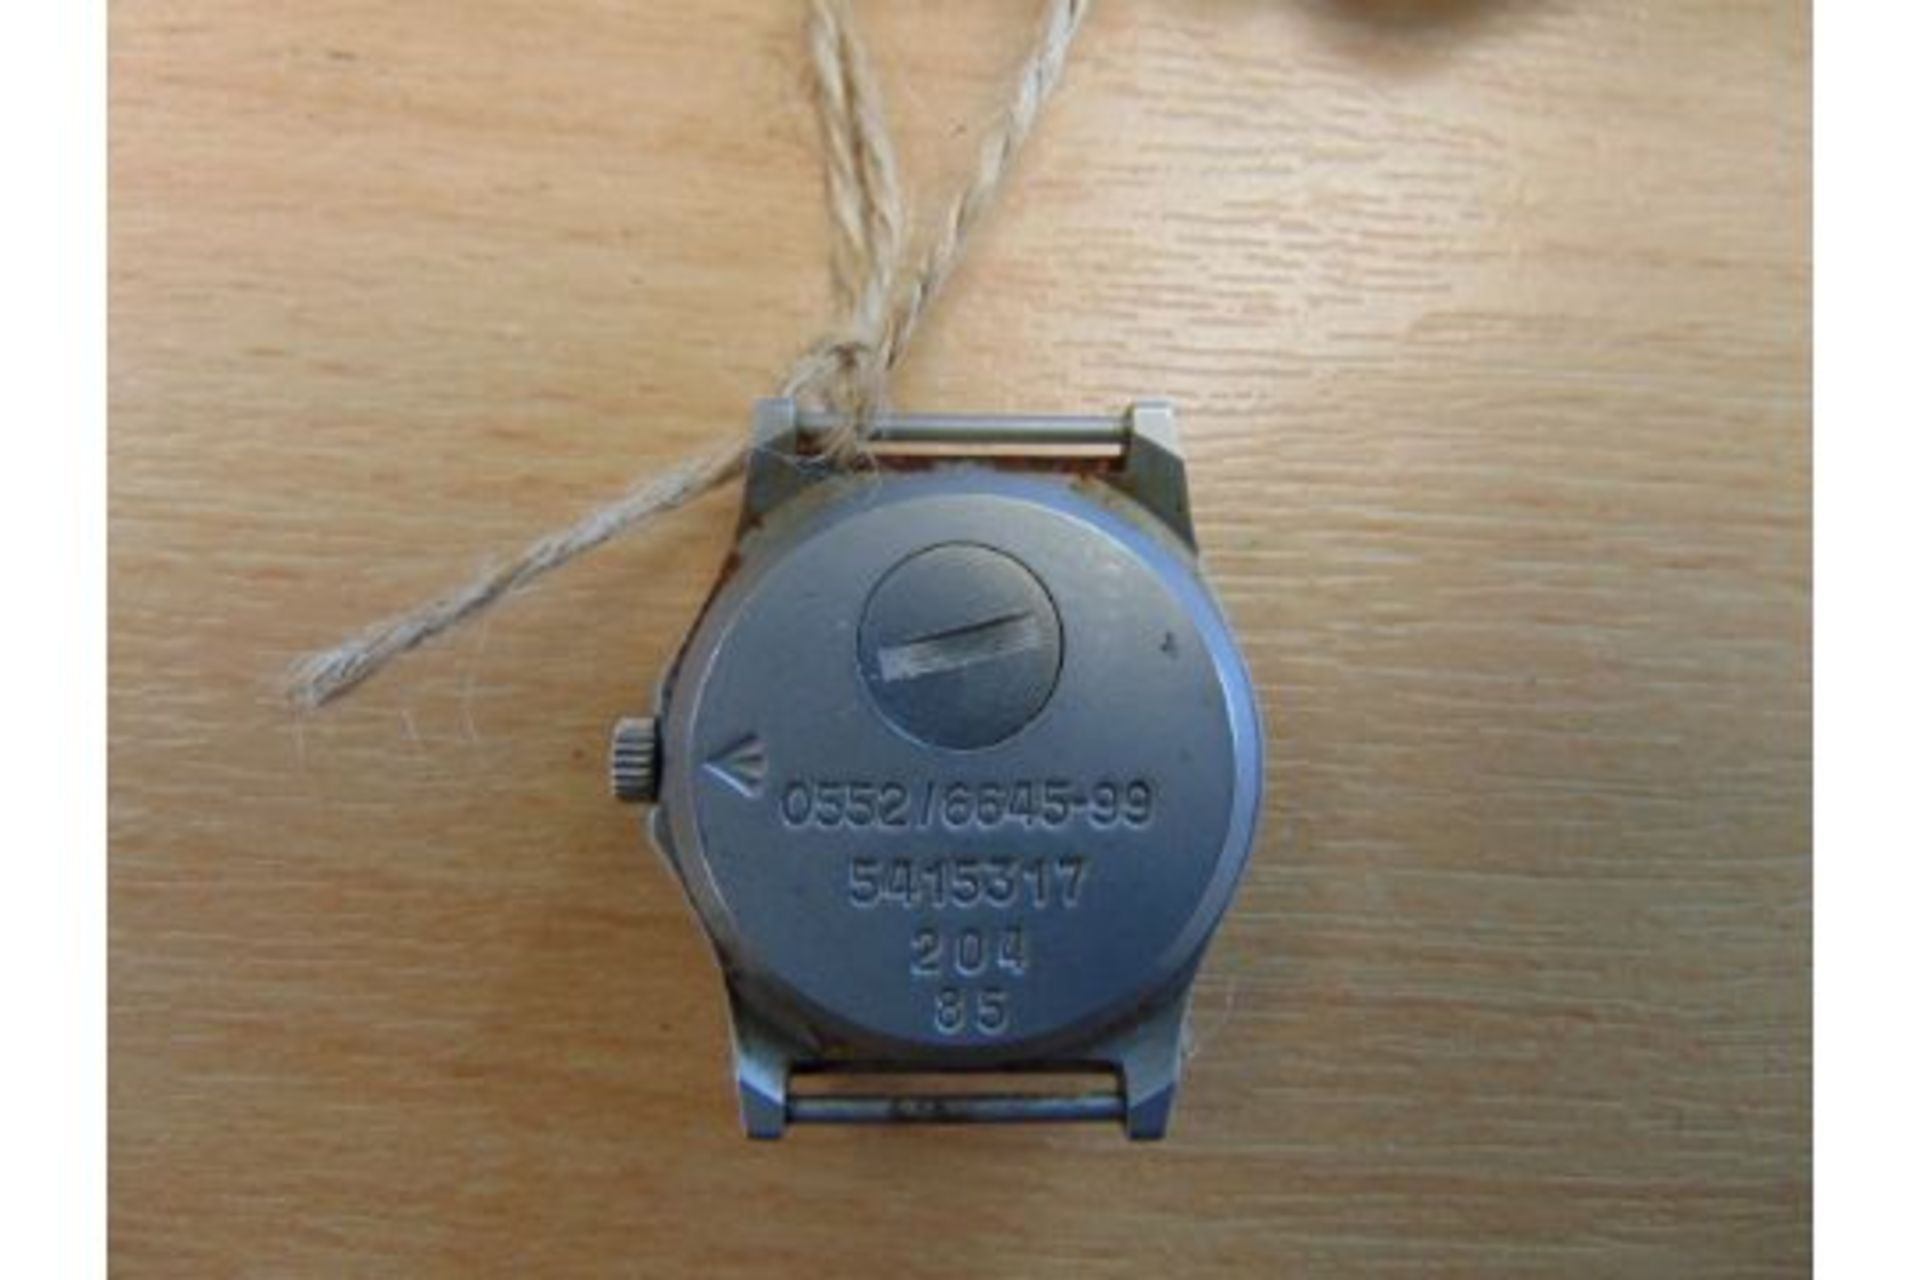 Rare CWC (Cabot Watch Co Switzerland) 0552 Royal Marines / Navy Issue FAT BOY Service Watch - Image 3 of 3